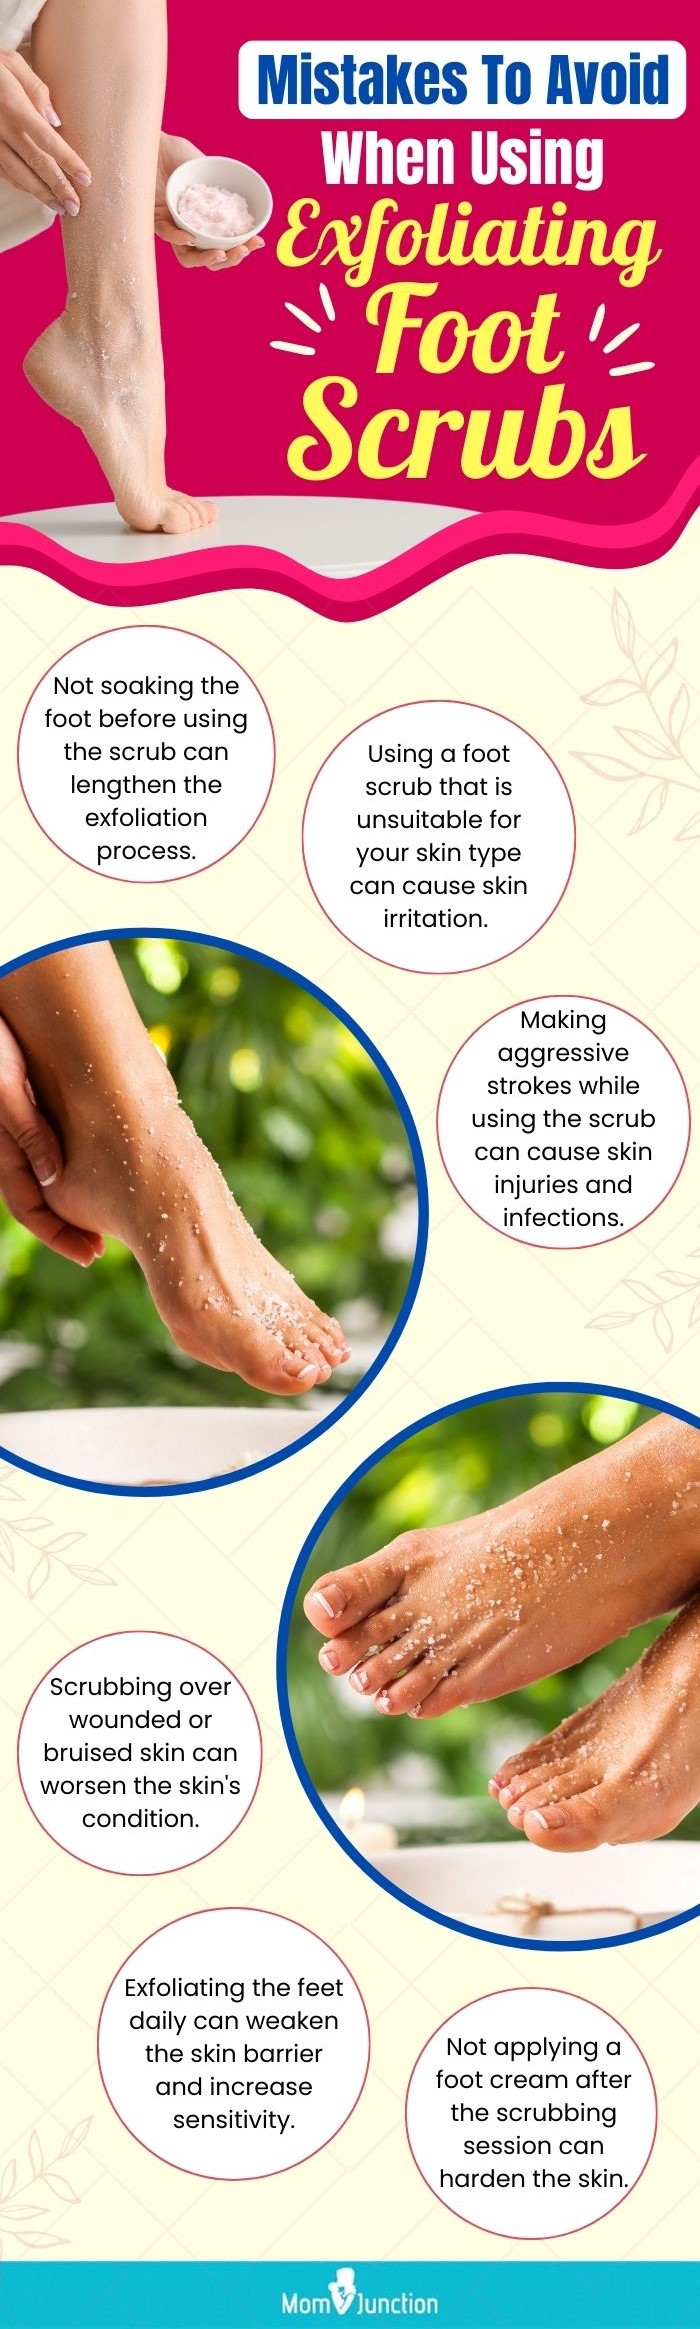 https://cdn2.momjunction.com/wp-content/uploads/2023/08/Mistakes-To-Avoid-When-Using-Exfoliating-Foot-Scrubs.jpg